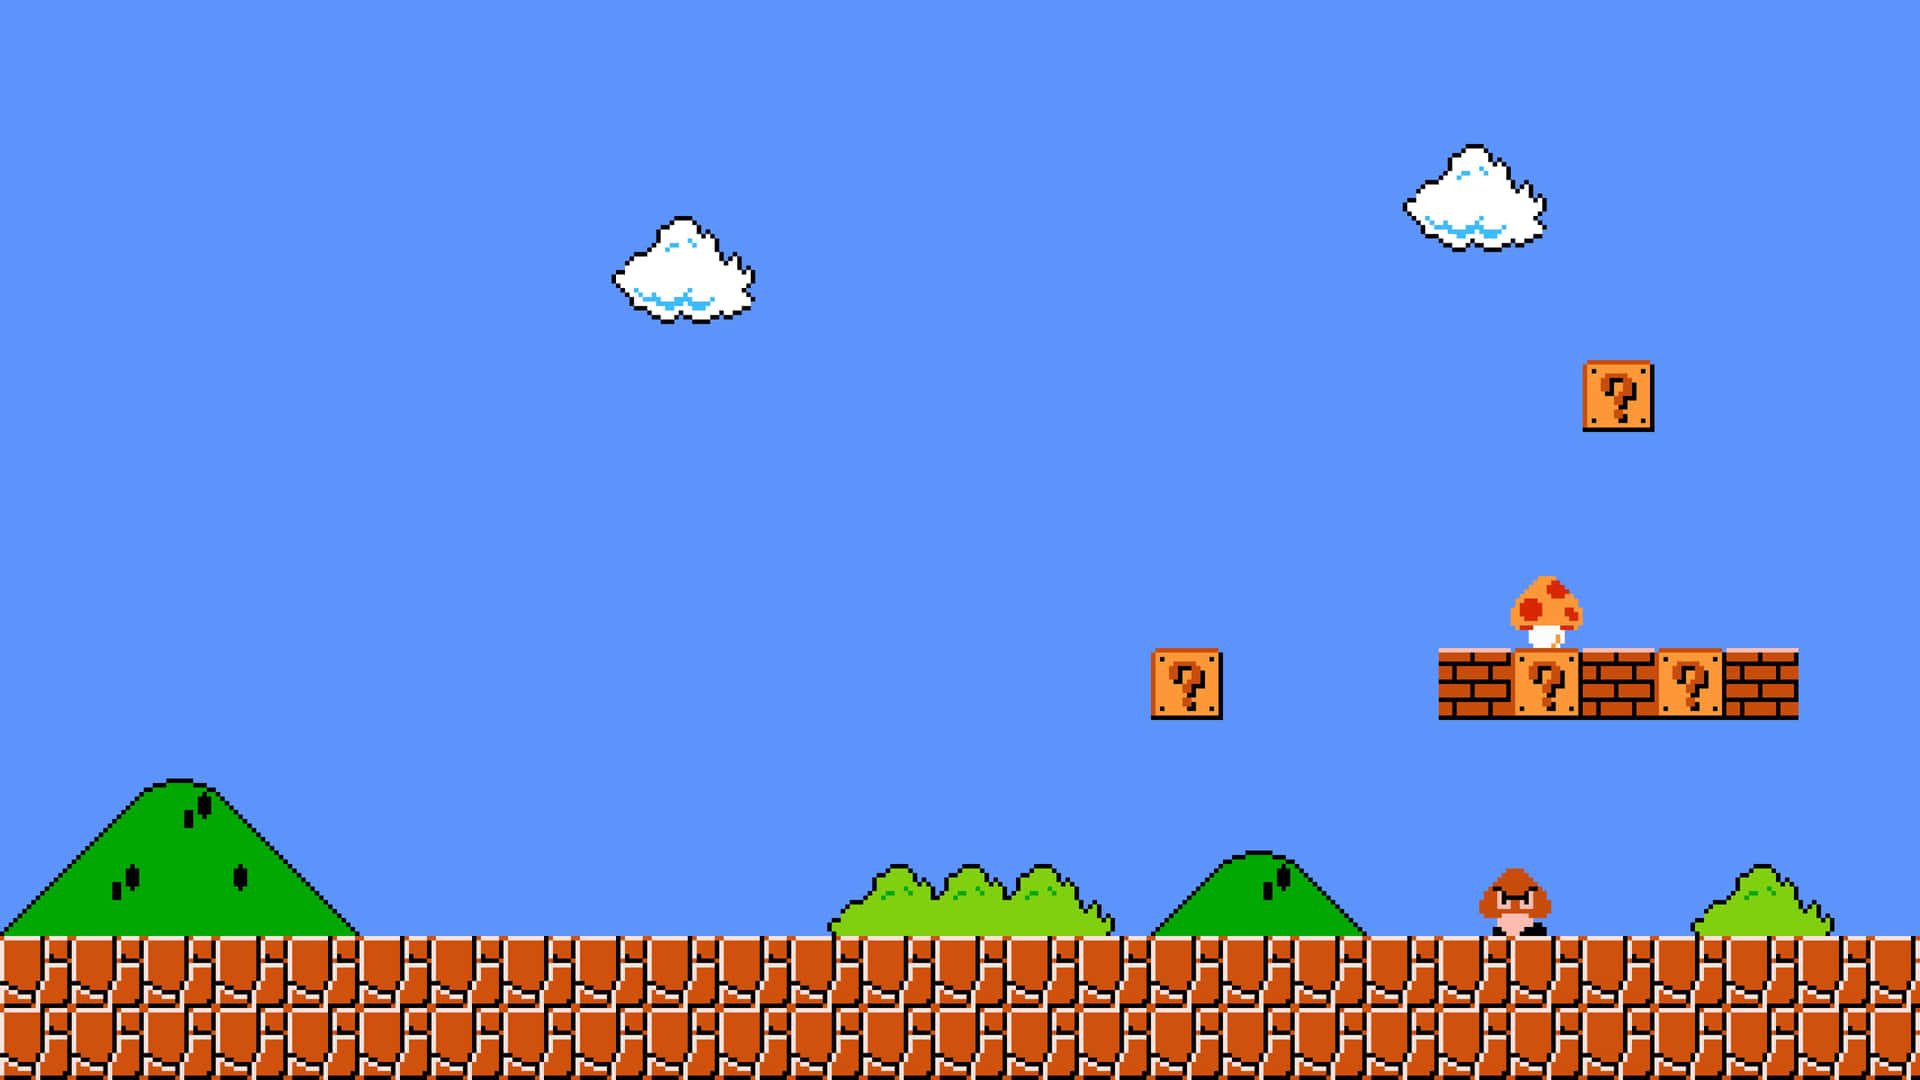 A Nintendo Mario Game With A Character On Top Of A Brick